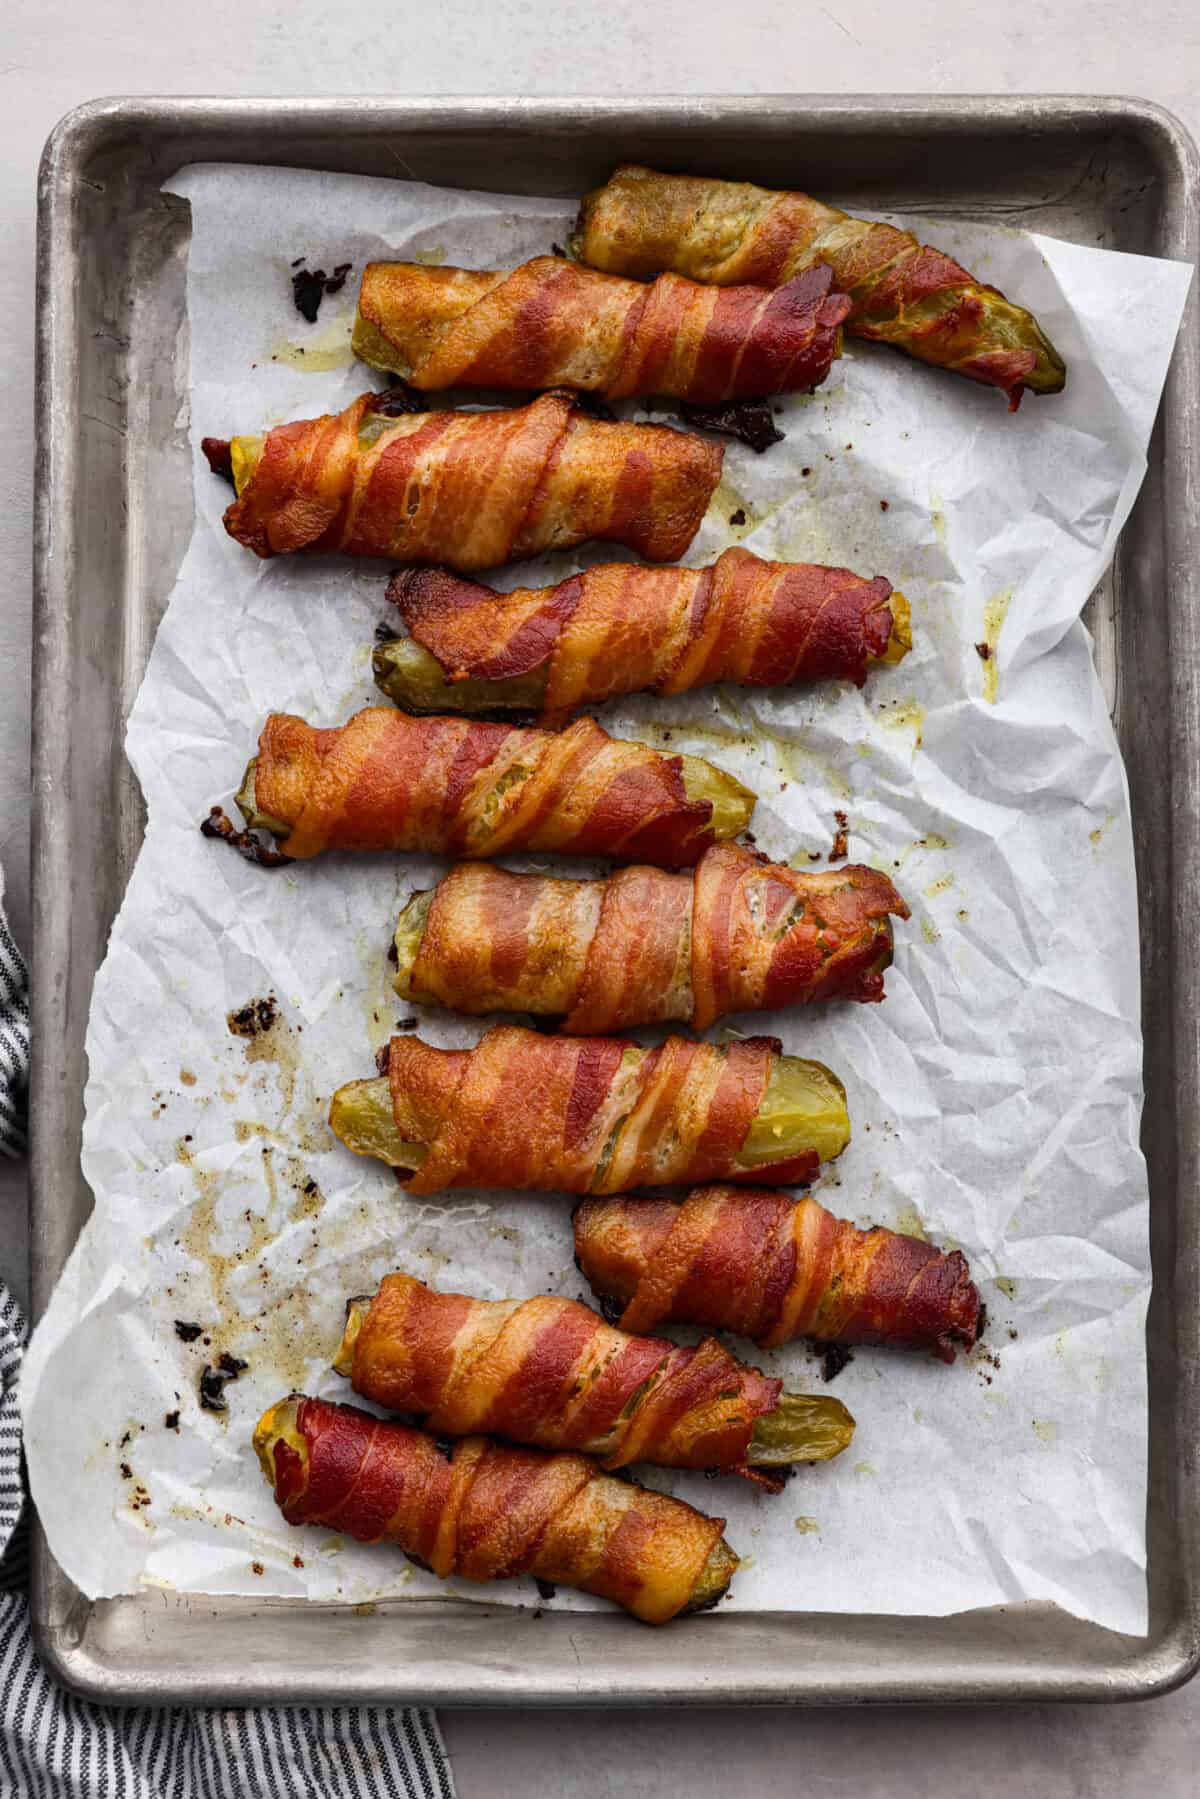 Bacon wrapped pickles on a baking sheet.